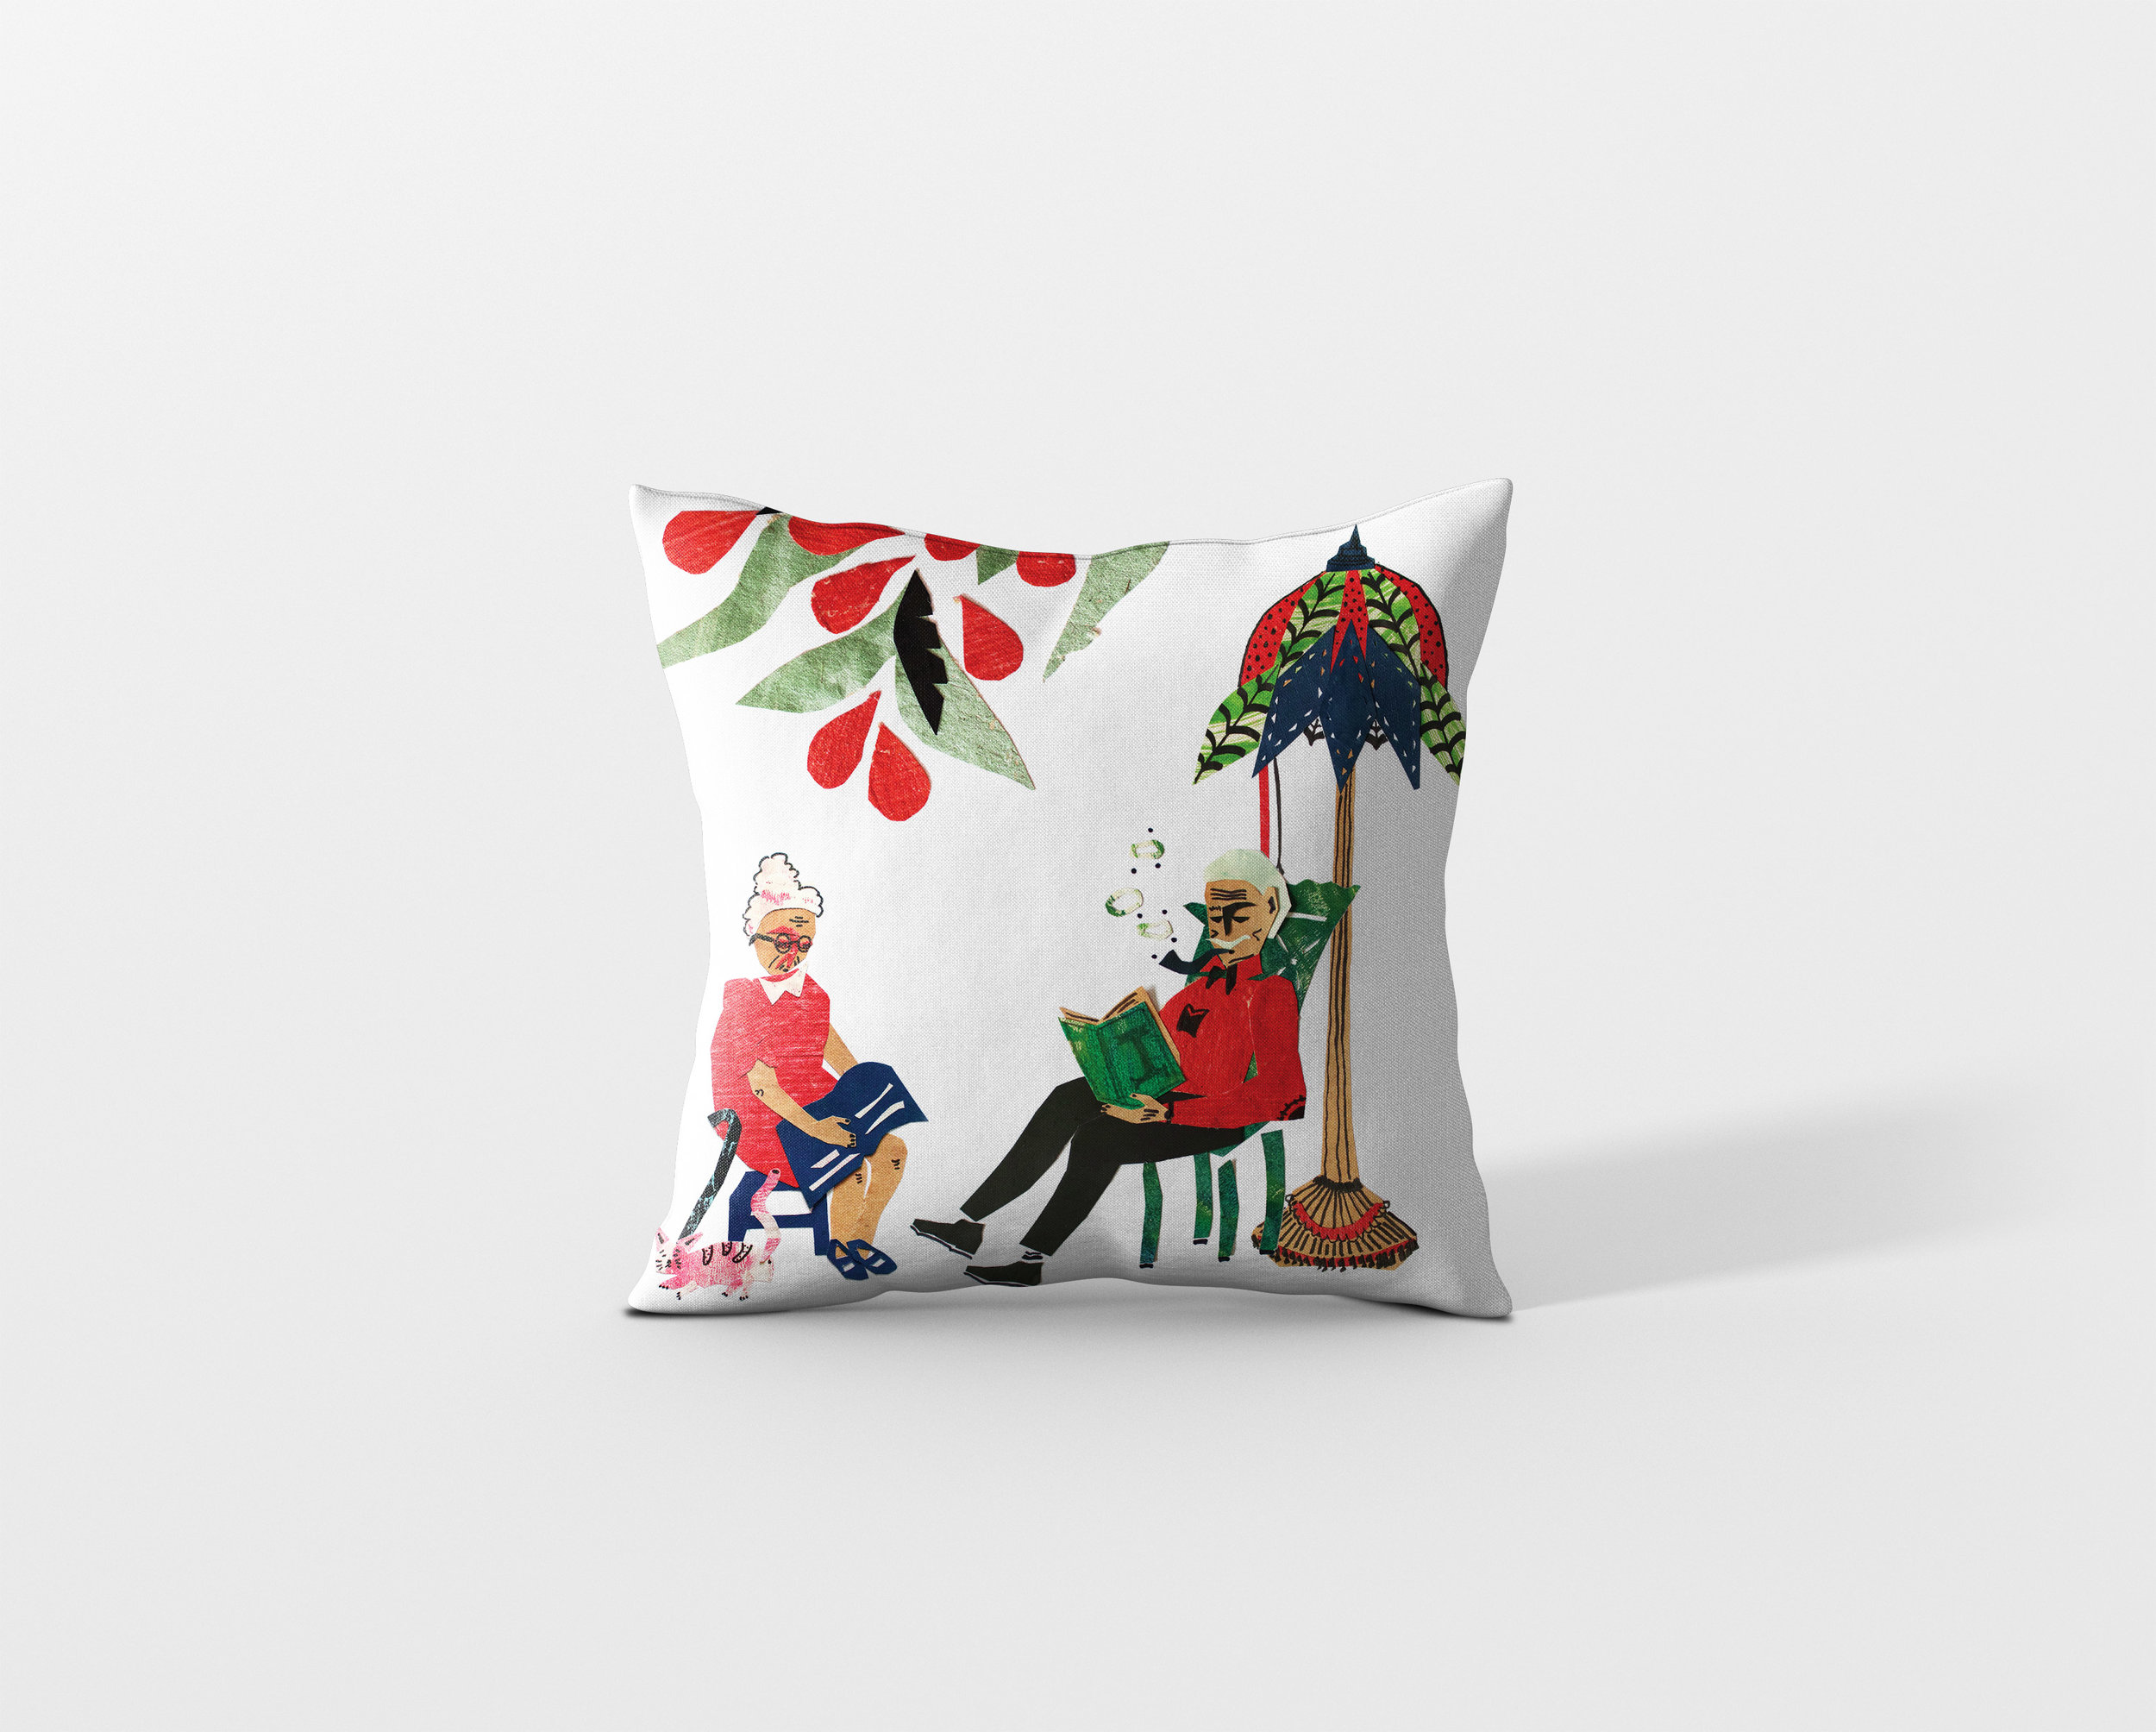  Pillowcase with illustrations digitally printed on. 